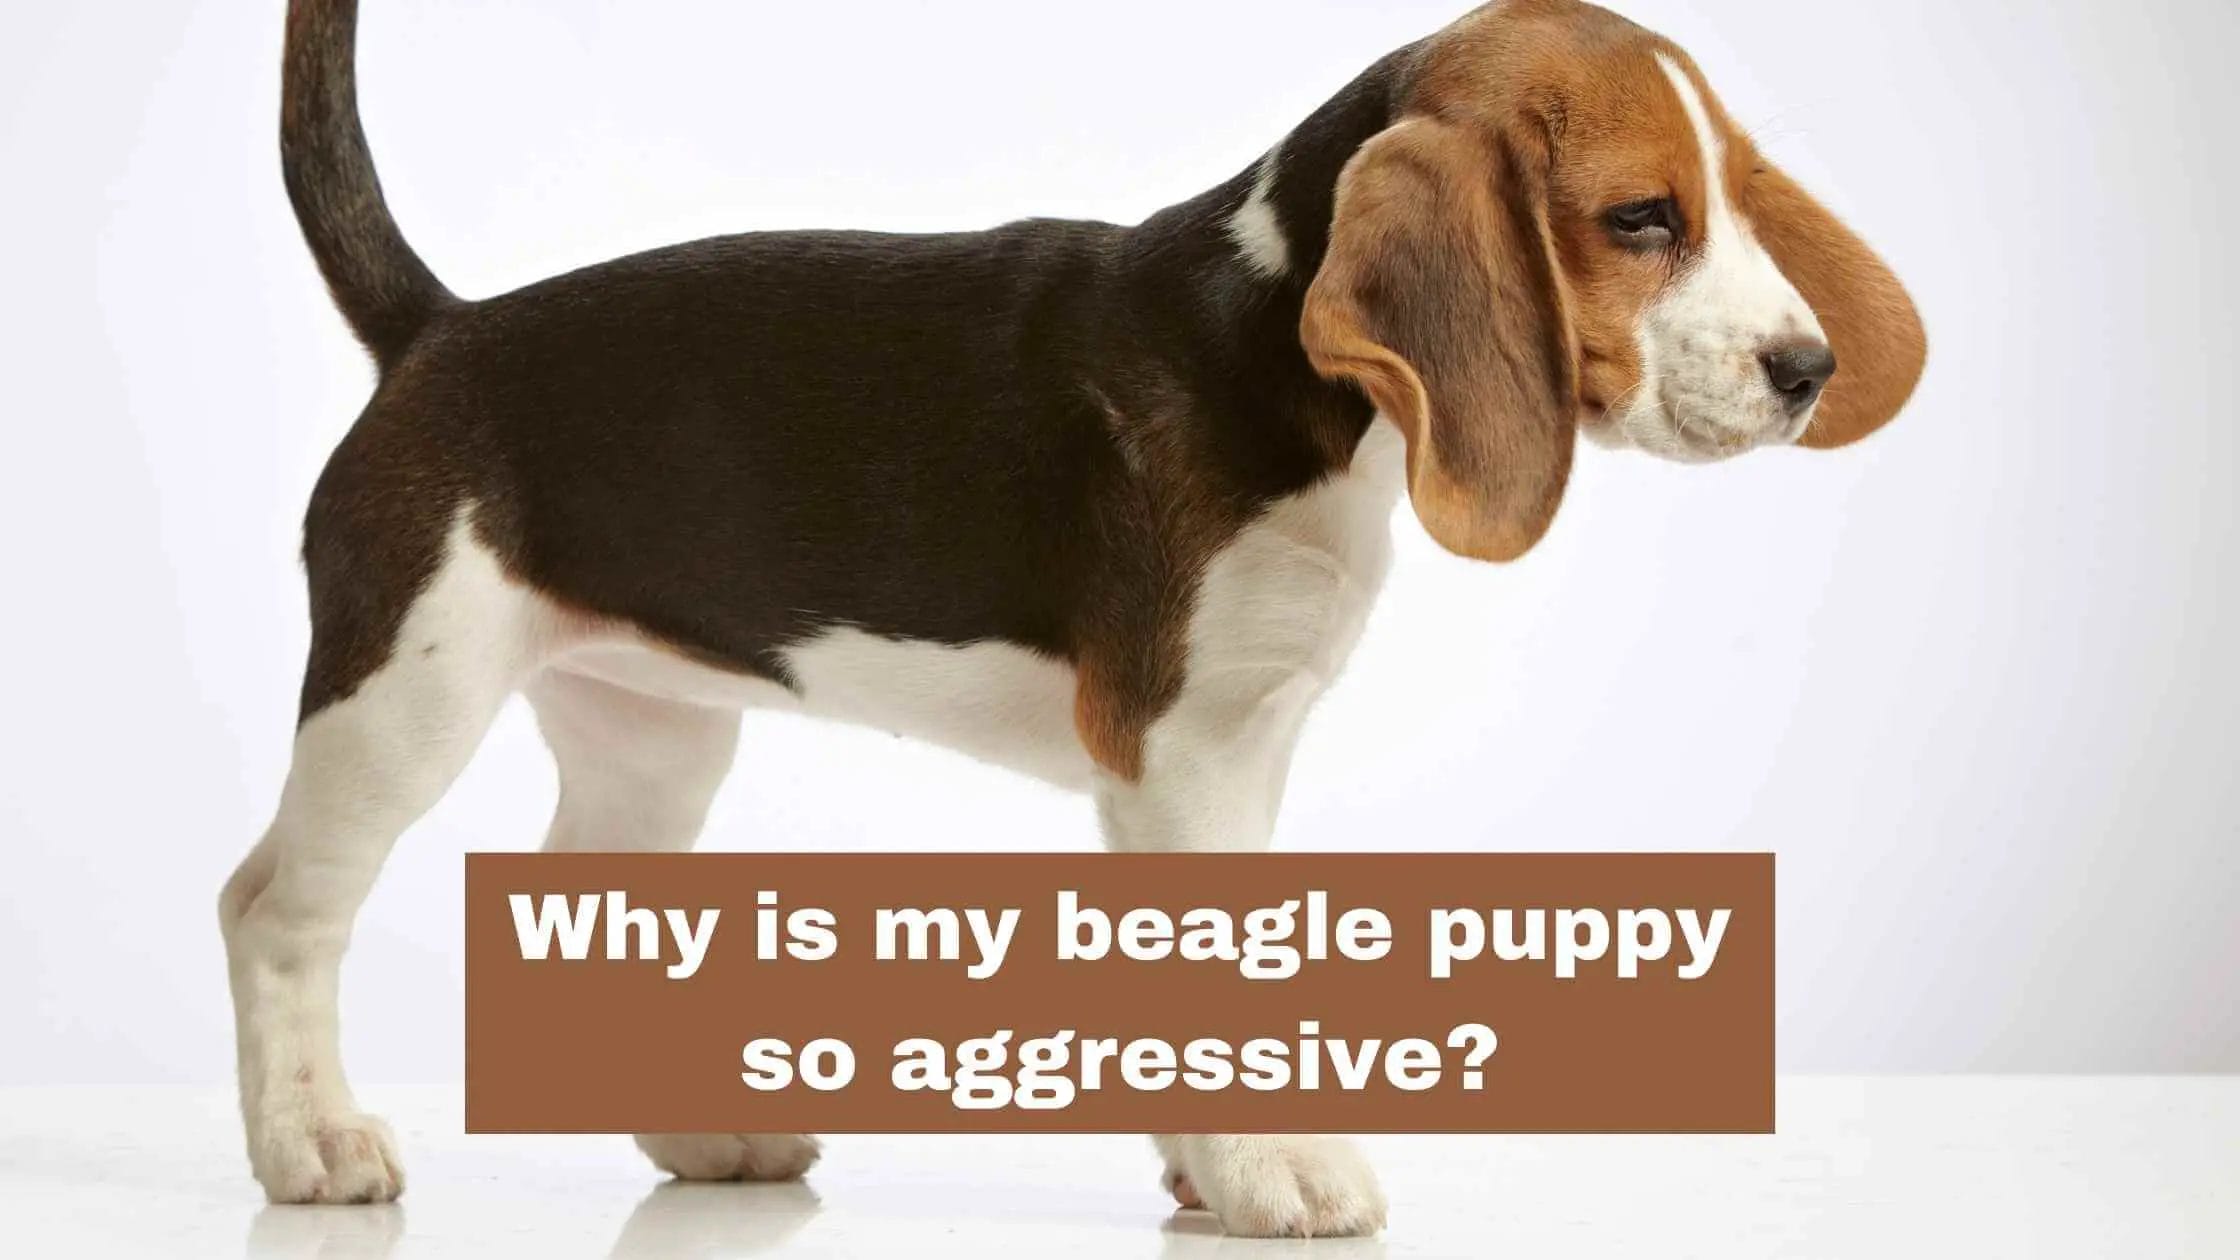 Why is my beagle puppy so aggressive